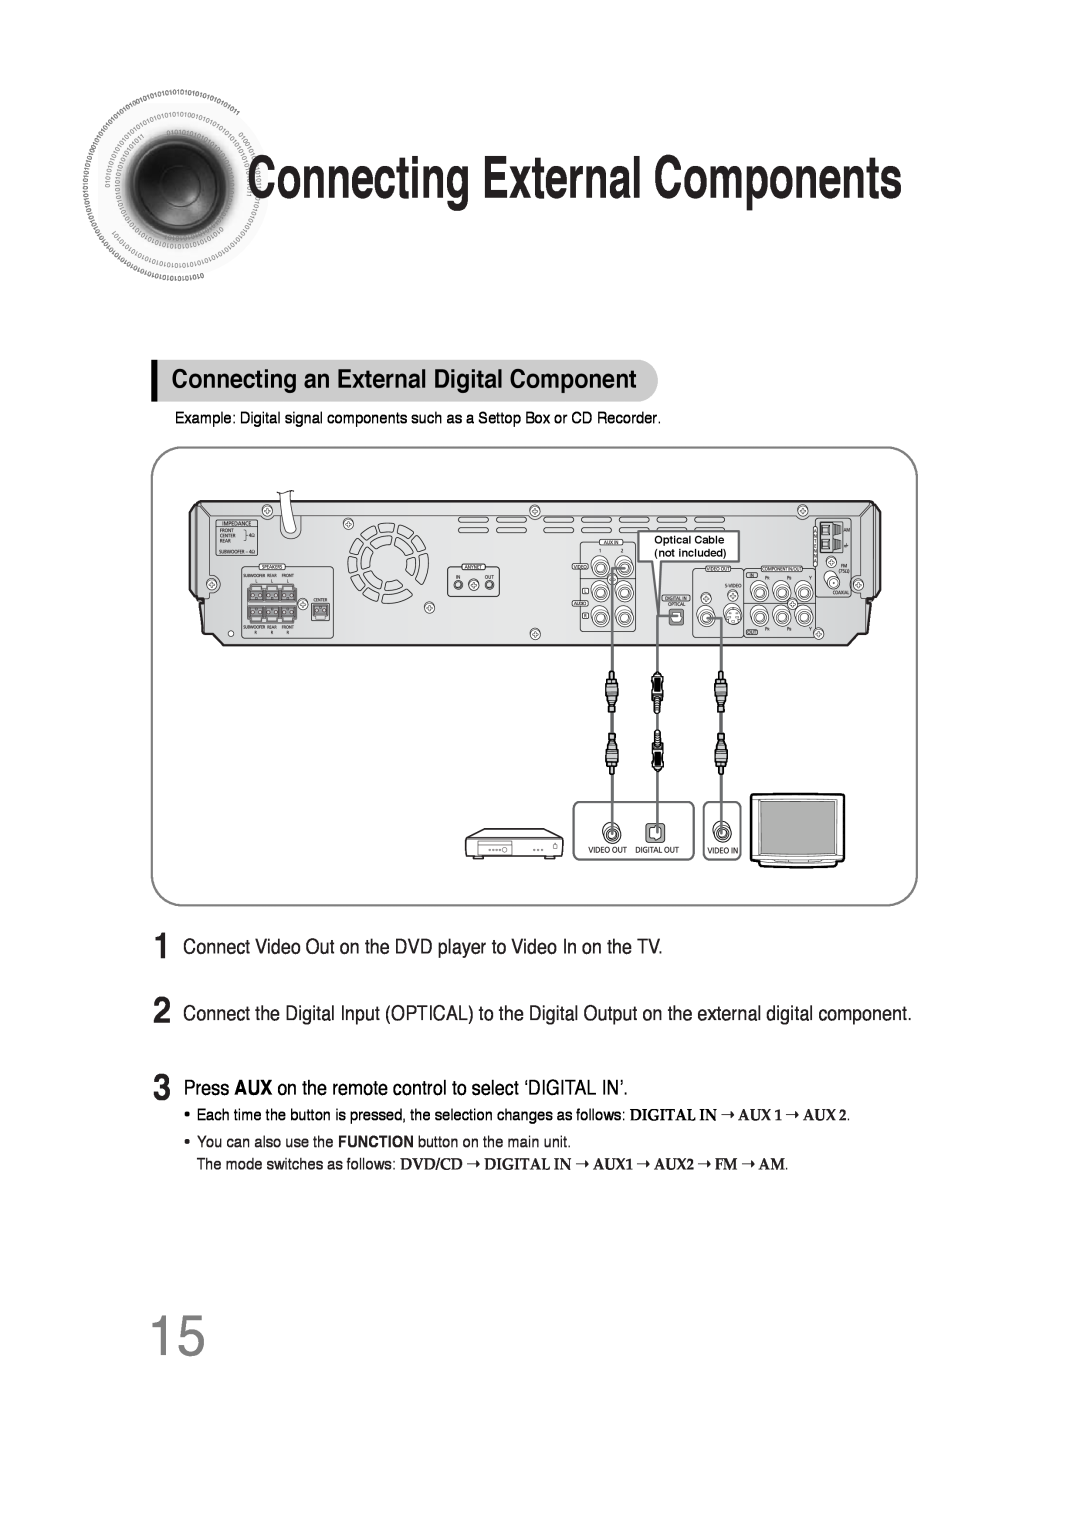 Samsung 20051111103302296 instruction manual Connecting an External Digital Component, ConnectingExternal Components 